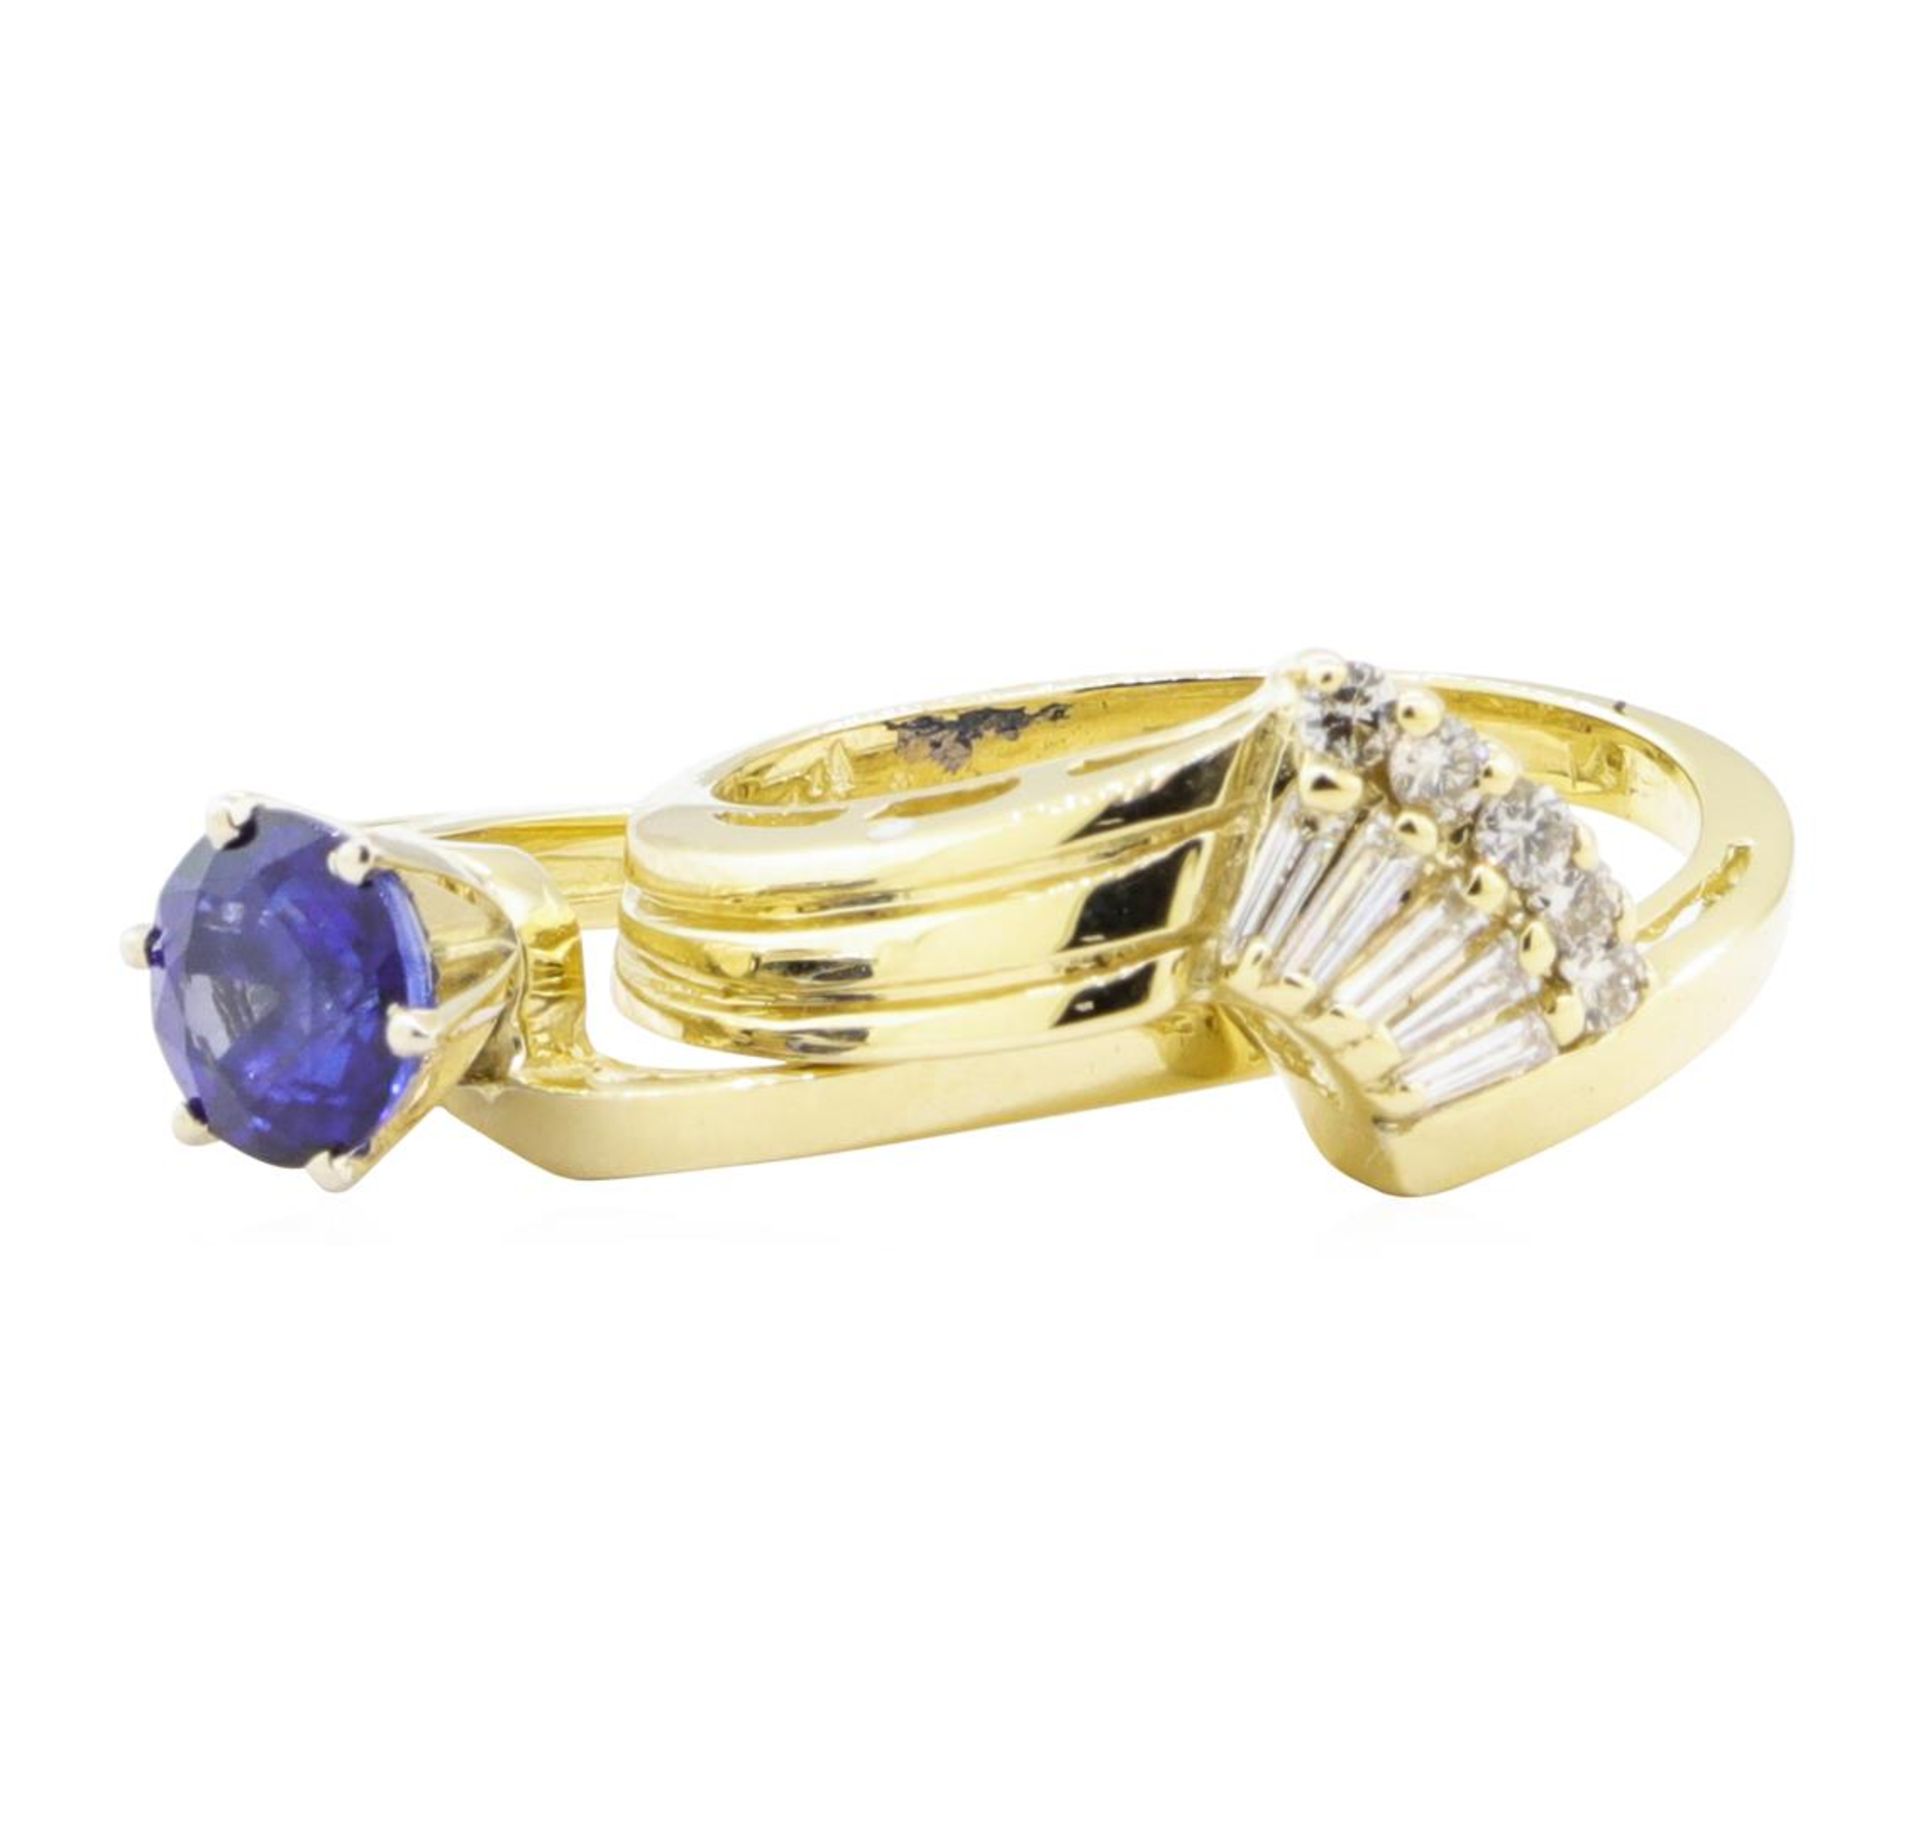 1.54ctw Sapphire and Diamond Ring - 14KT Yellow Gold - Image 4 of 4